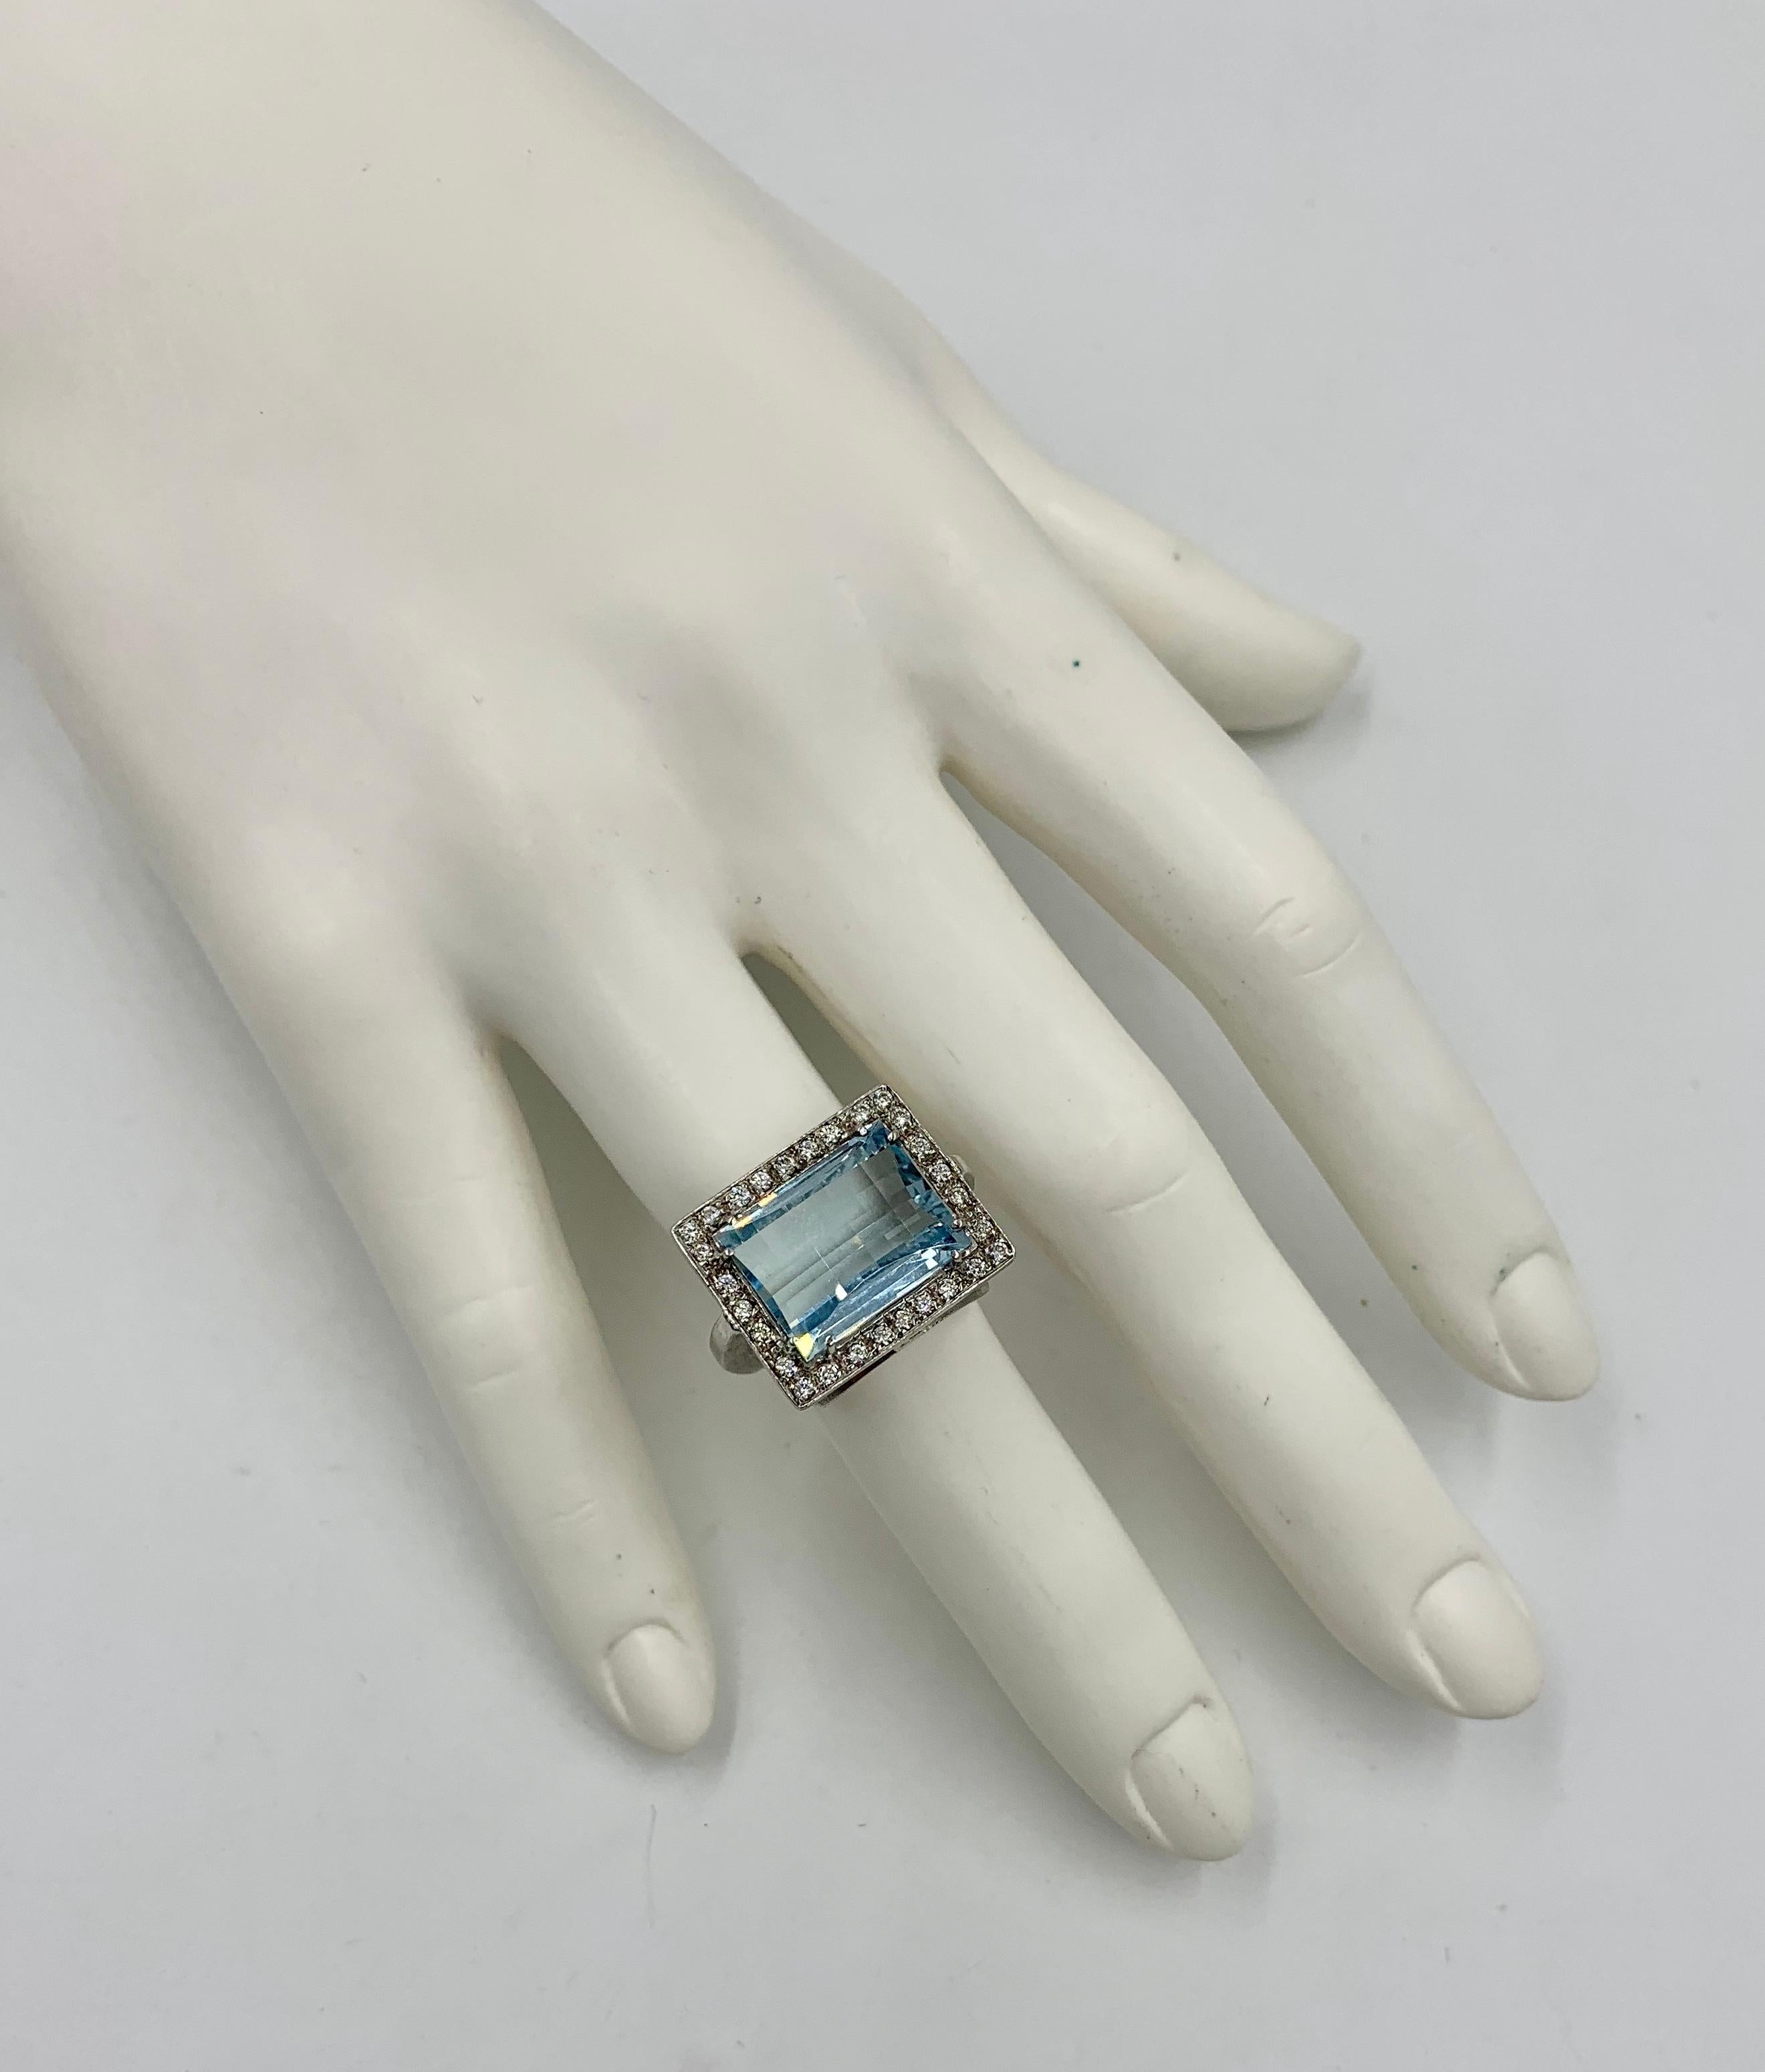 A spectacular Ring with a 9.0 Carat Fancy Beveled Checkerboard Cut Aquamarine surrounded by 30 gorgeous sparkling Diamonds set in 18 Karat White Gold.  The stunning Aquamarine is a light sky blue with a checkerboard curved top.  The Aquamarine is